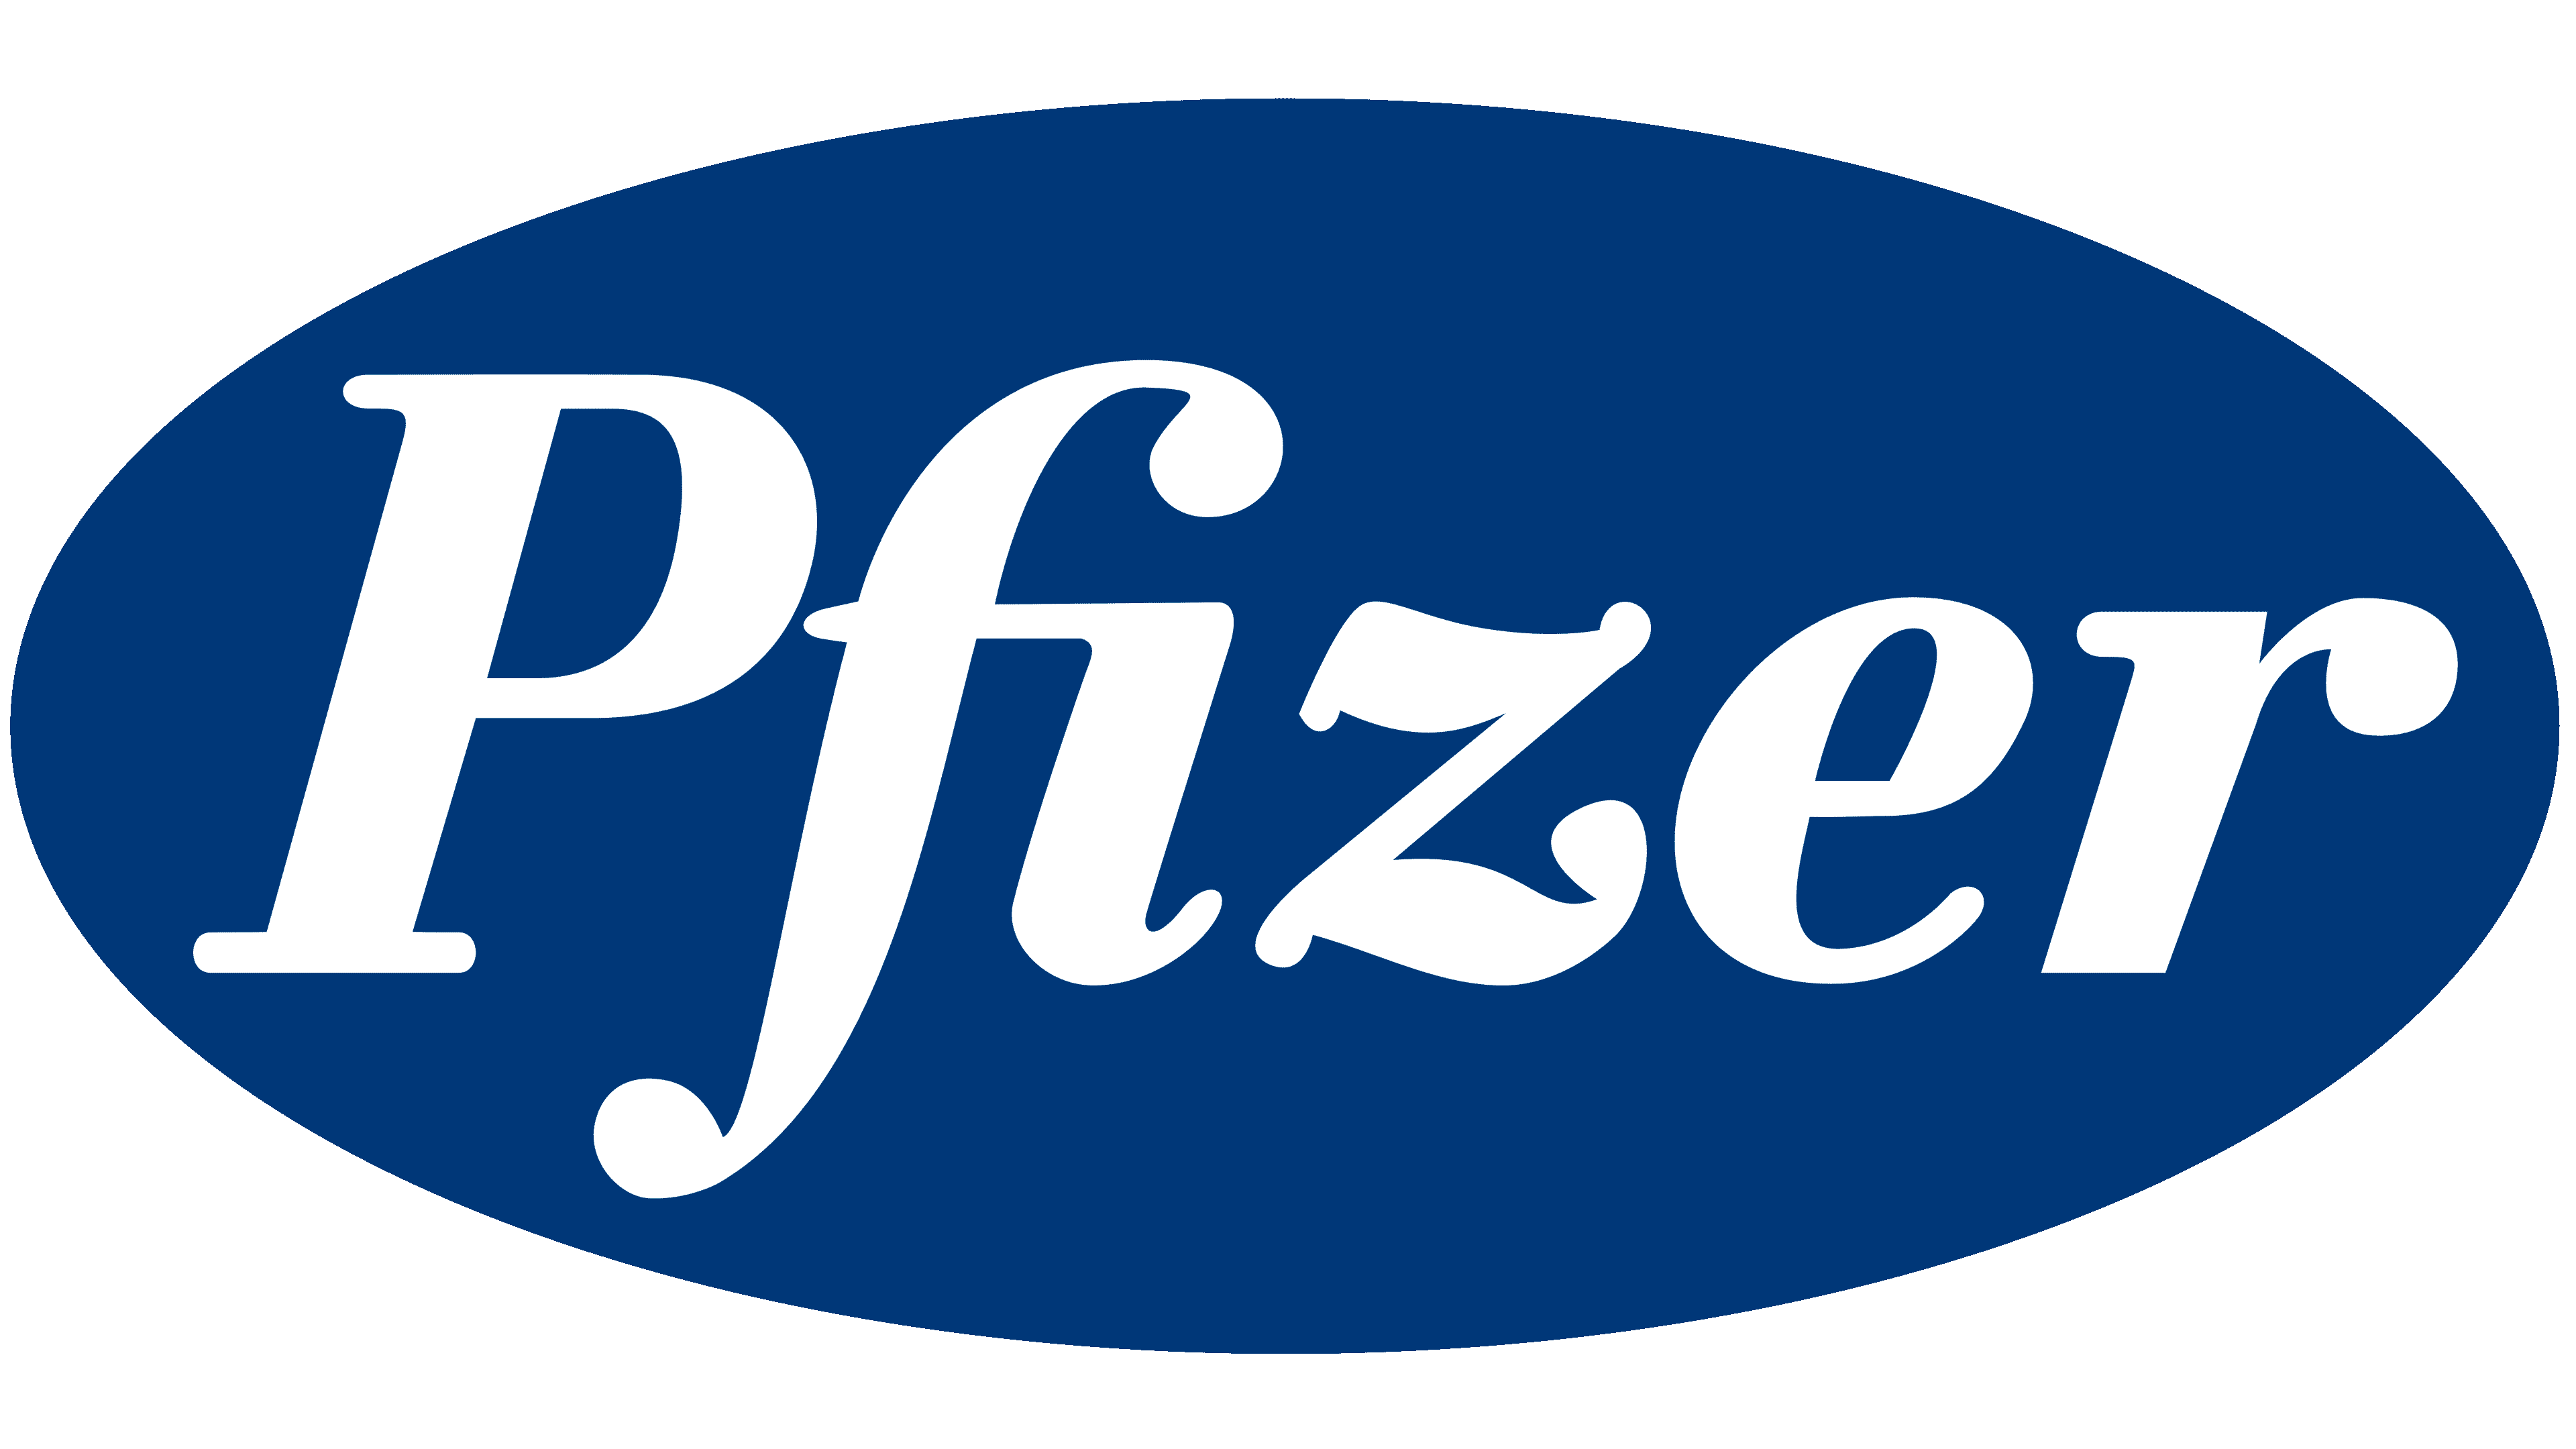 Pfizer Inc. (NYSE:PFE) Holdings Decreased by Vanguard Personalized Indexing  Management LLC